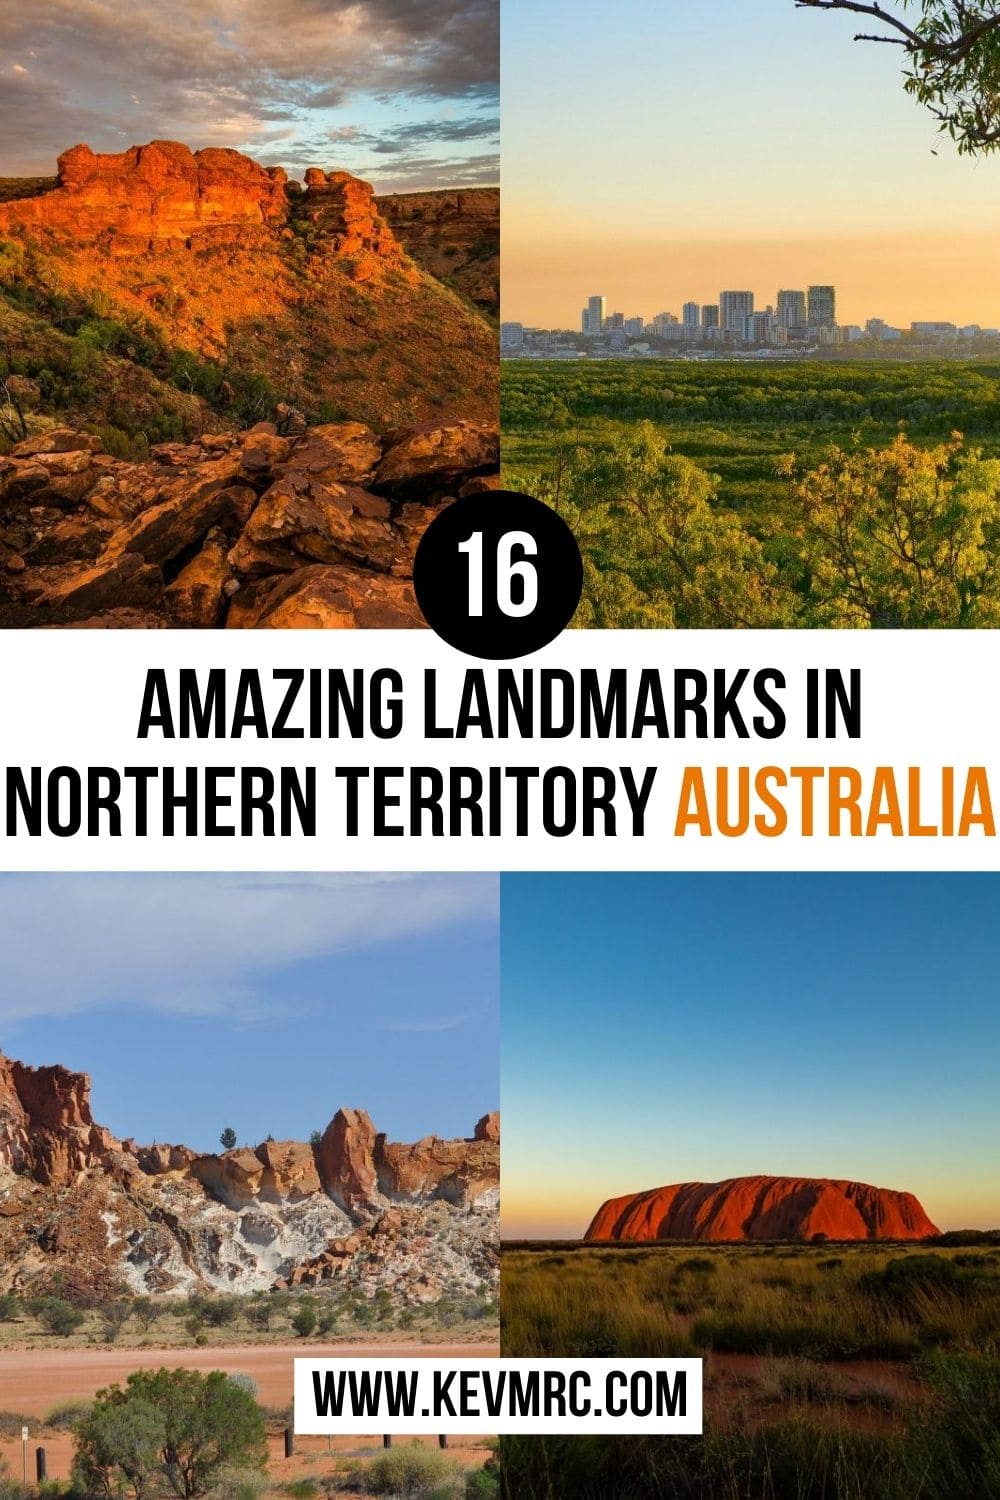 16 Famous Landmarks in Northern Territory Australia. From Darwin to Alice Springs, the NT has many must-see places. Among them, national parks, hot springs and Aboriginal cultural wonders. Here is the top 16 landmarks in the NT! northern territory australia road trip | northern territory australia things to do | northern territory australia bucket lists | northern territory australia travel | things to do in northern territory | northern territory road trip | travel northern territory